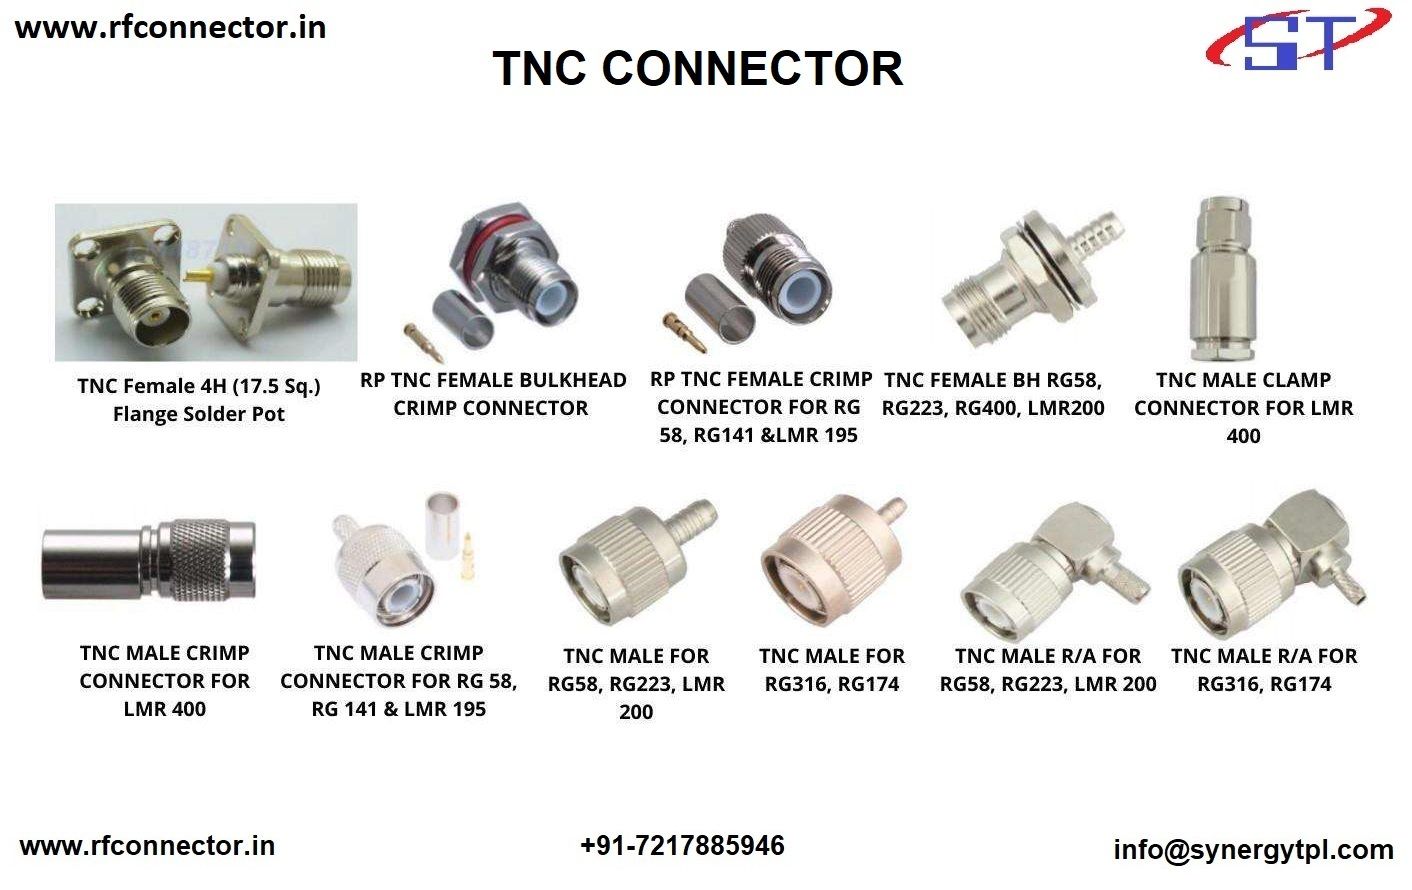 TNC male crimp connector for LMR 100 cable